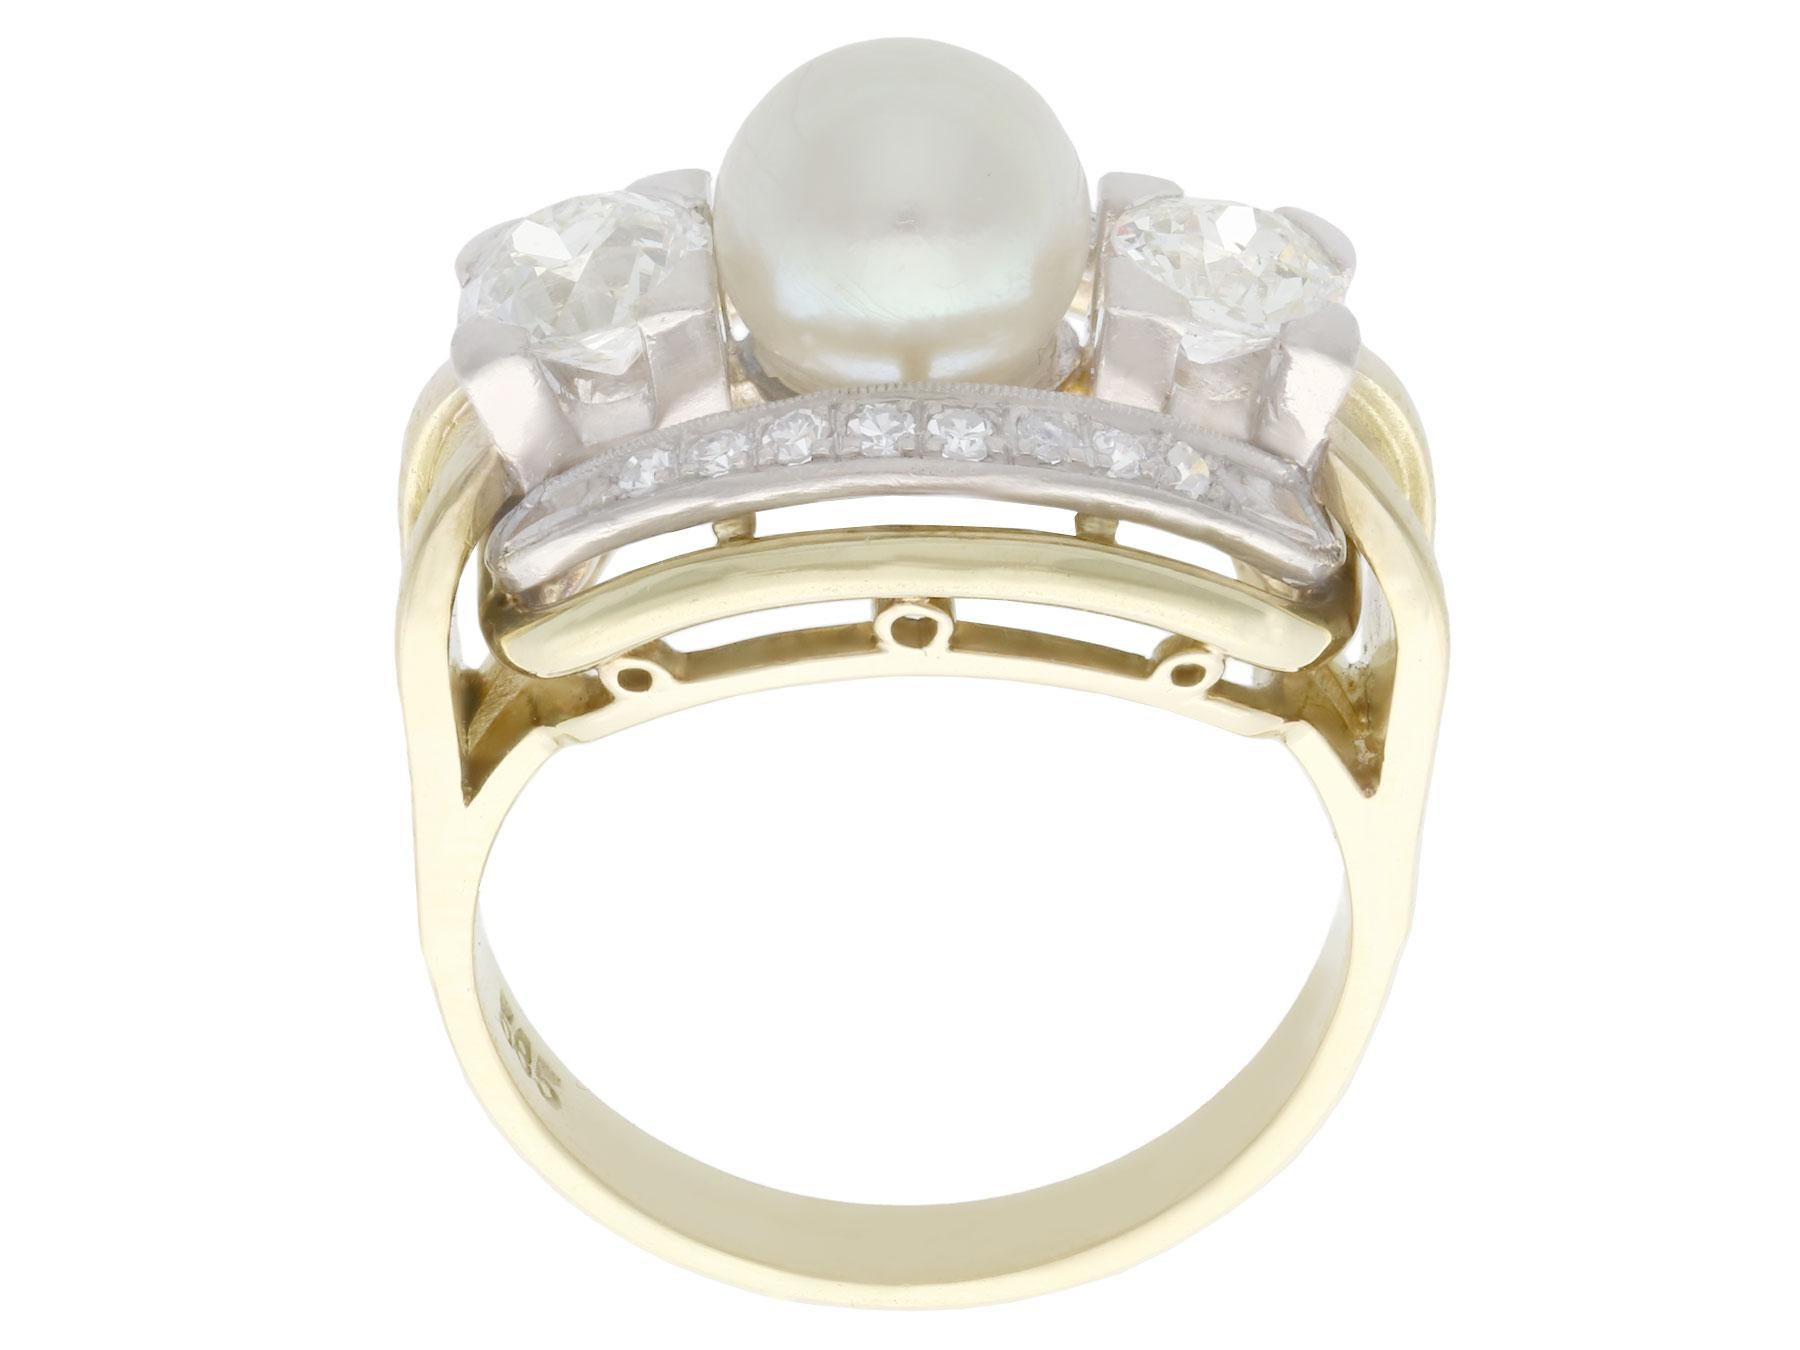 Vintage 1950s Cultured Pearl and 1.23 Carat Diamond Yellow Gold Cocktail Ring In Excellent Condition For Sale In Jesmond, Newcastle Upon Tyne